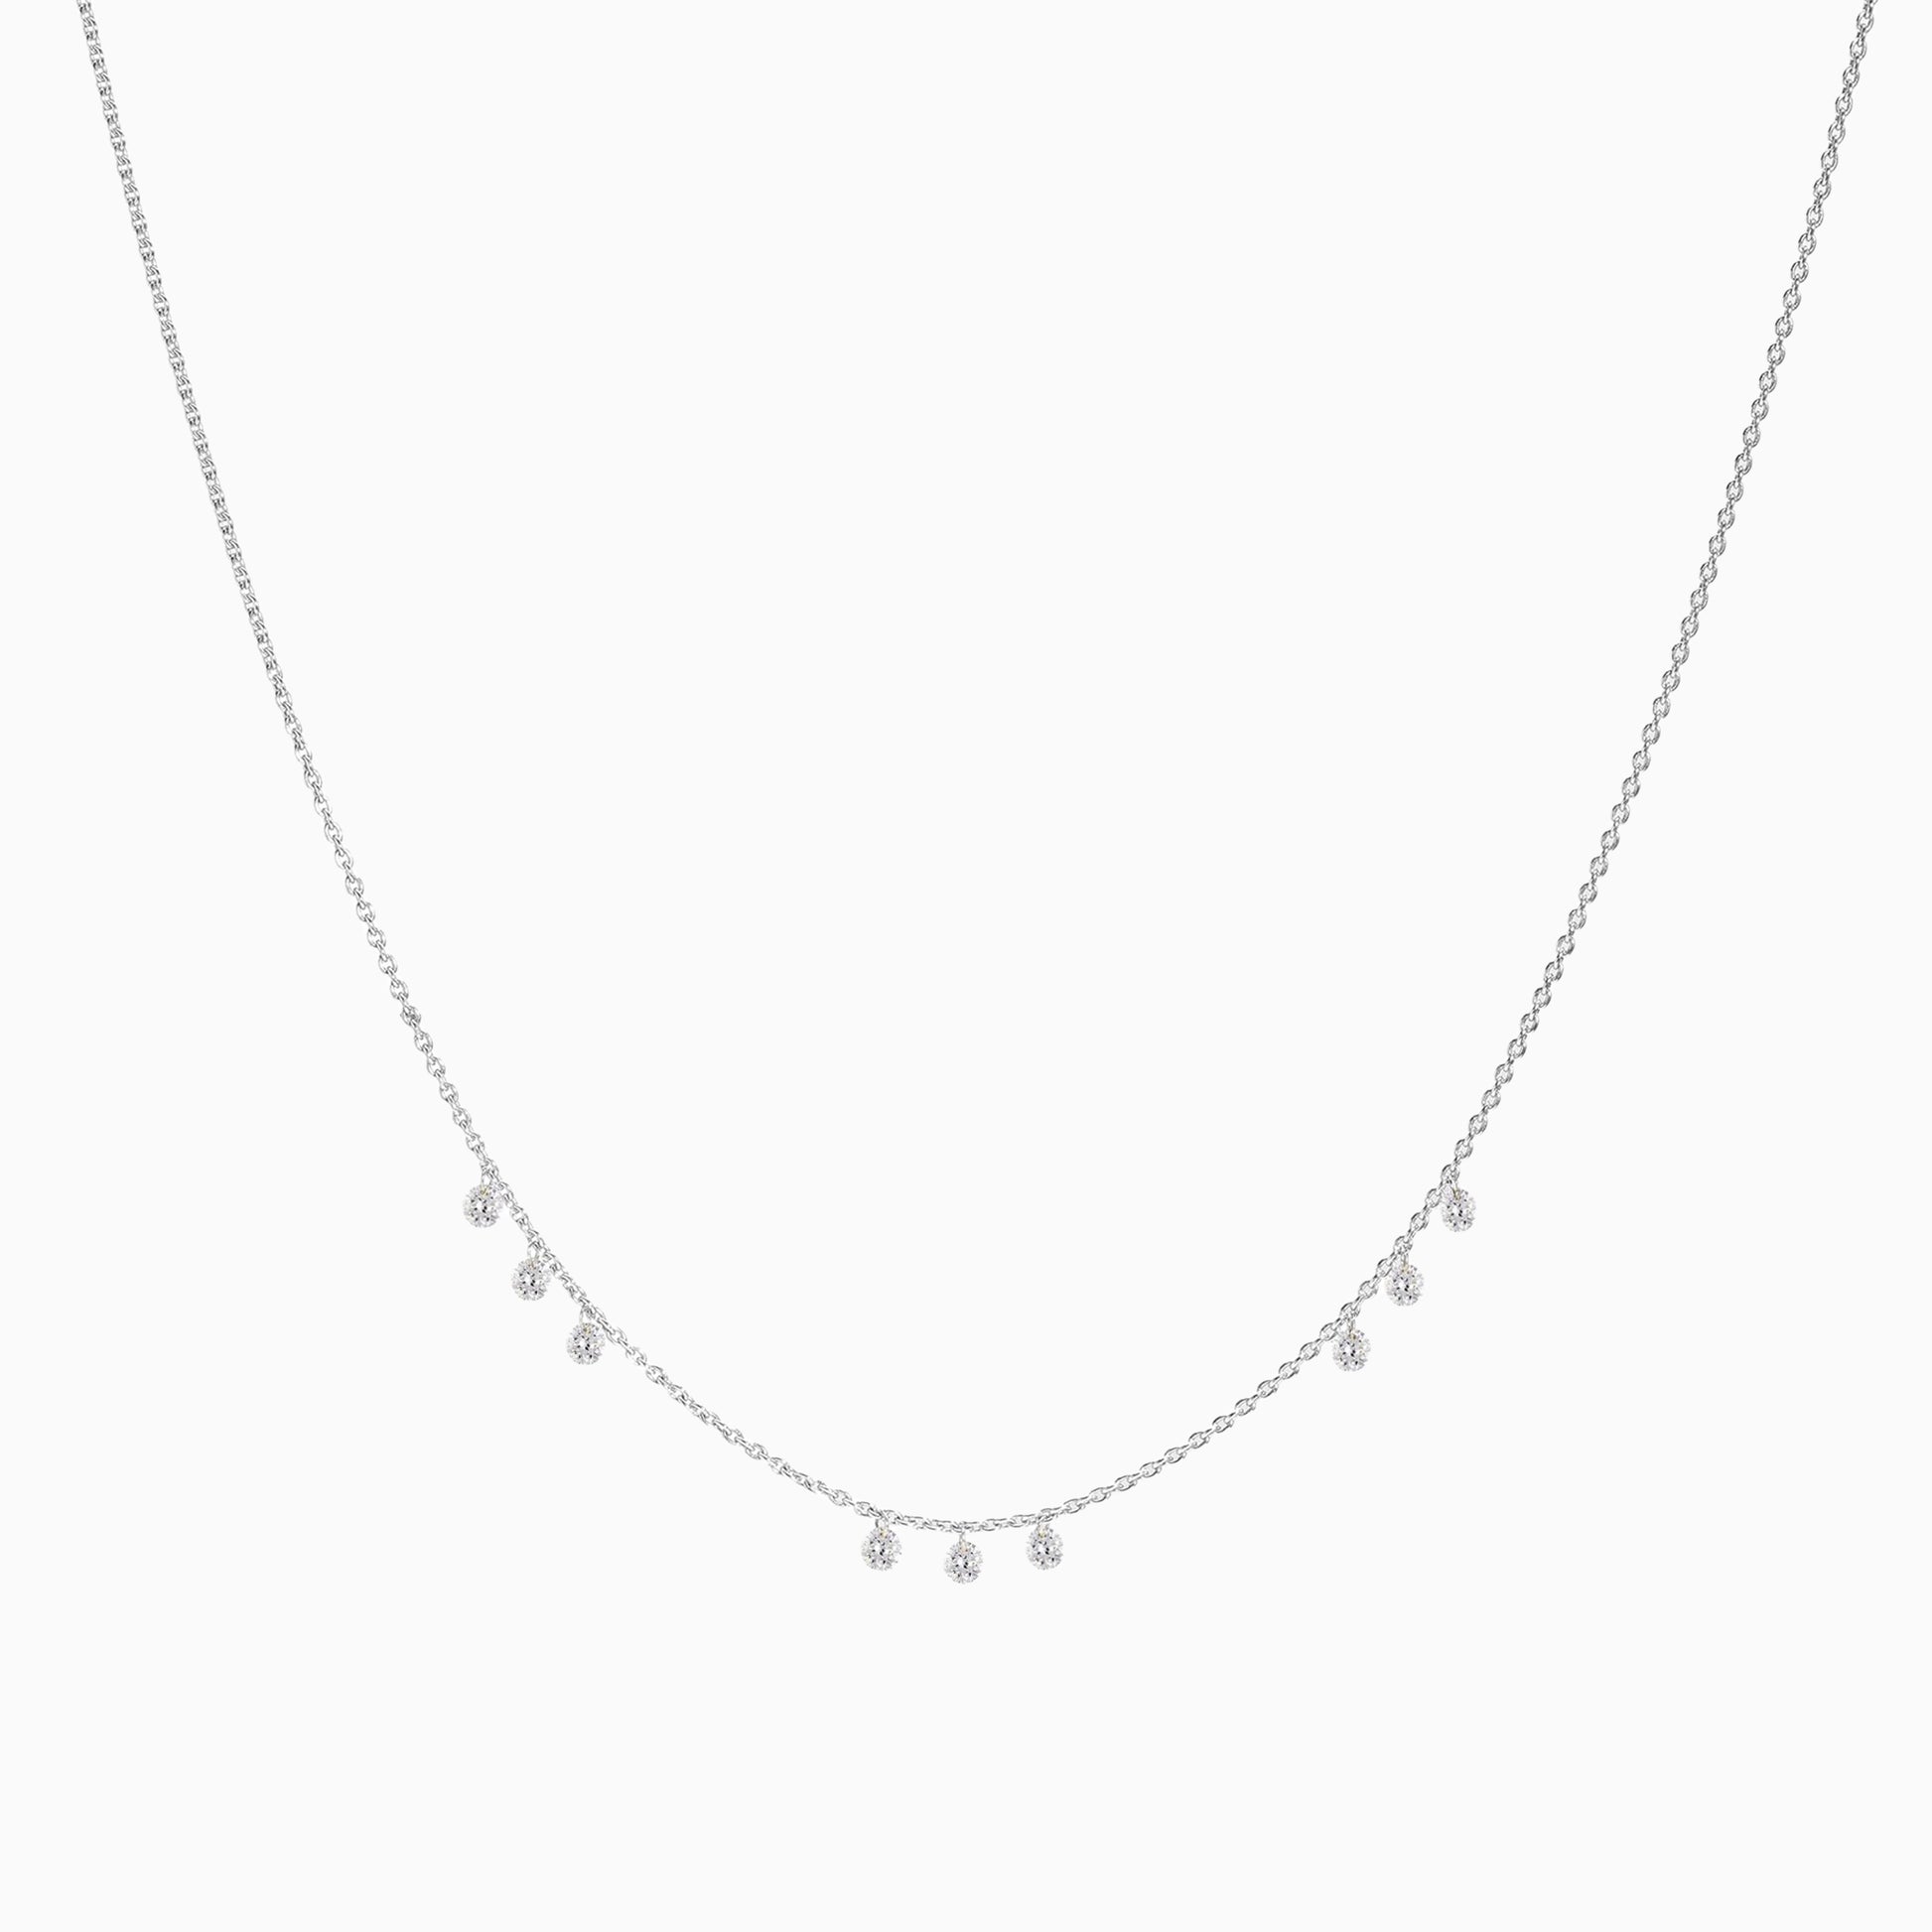 Floating Nine Diamonds Necklace in White Gold on a white background